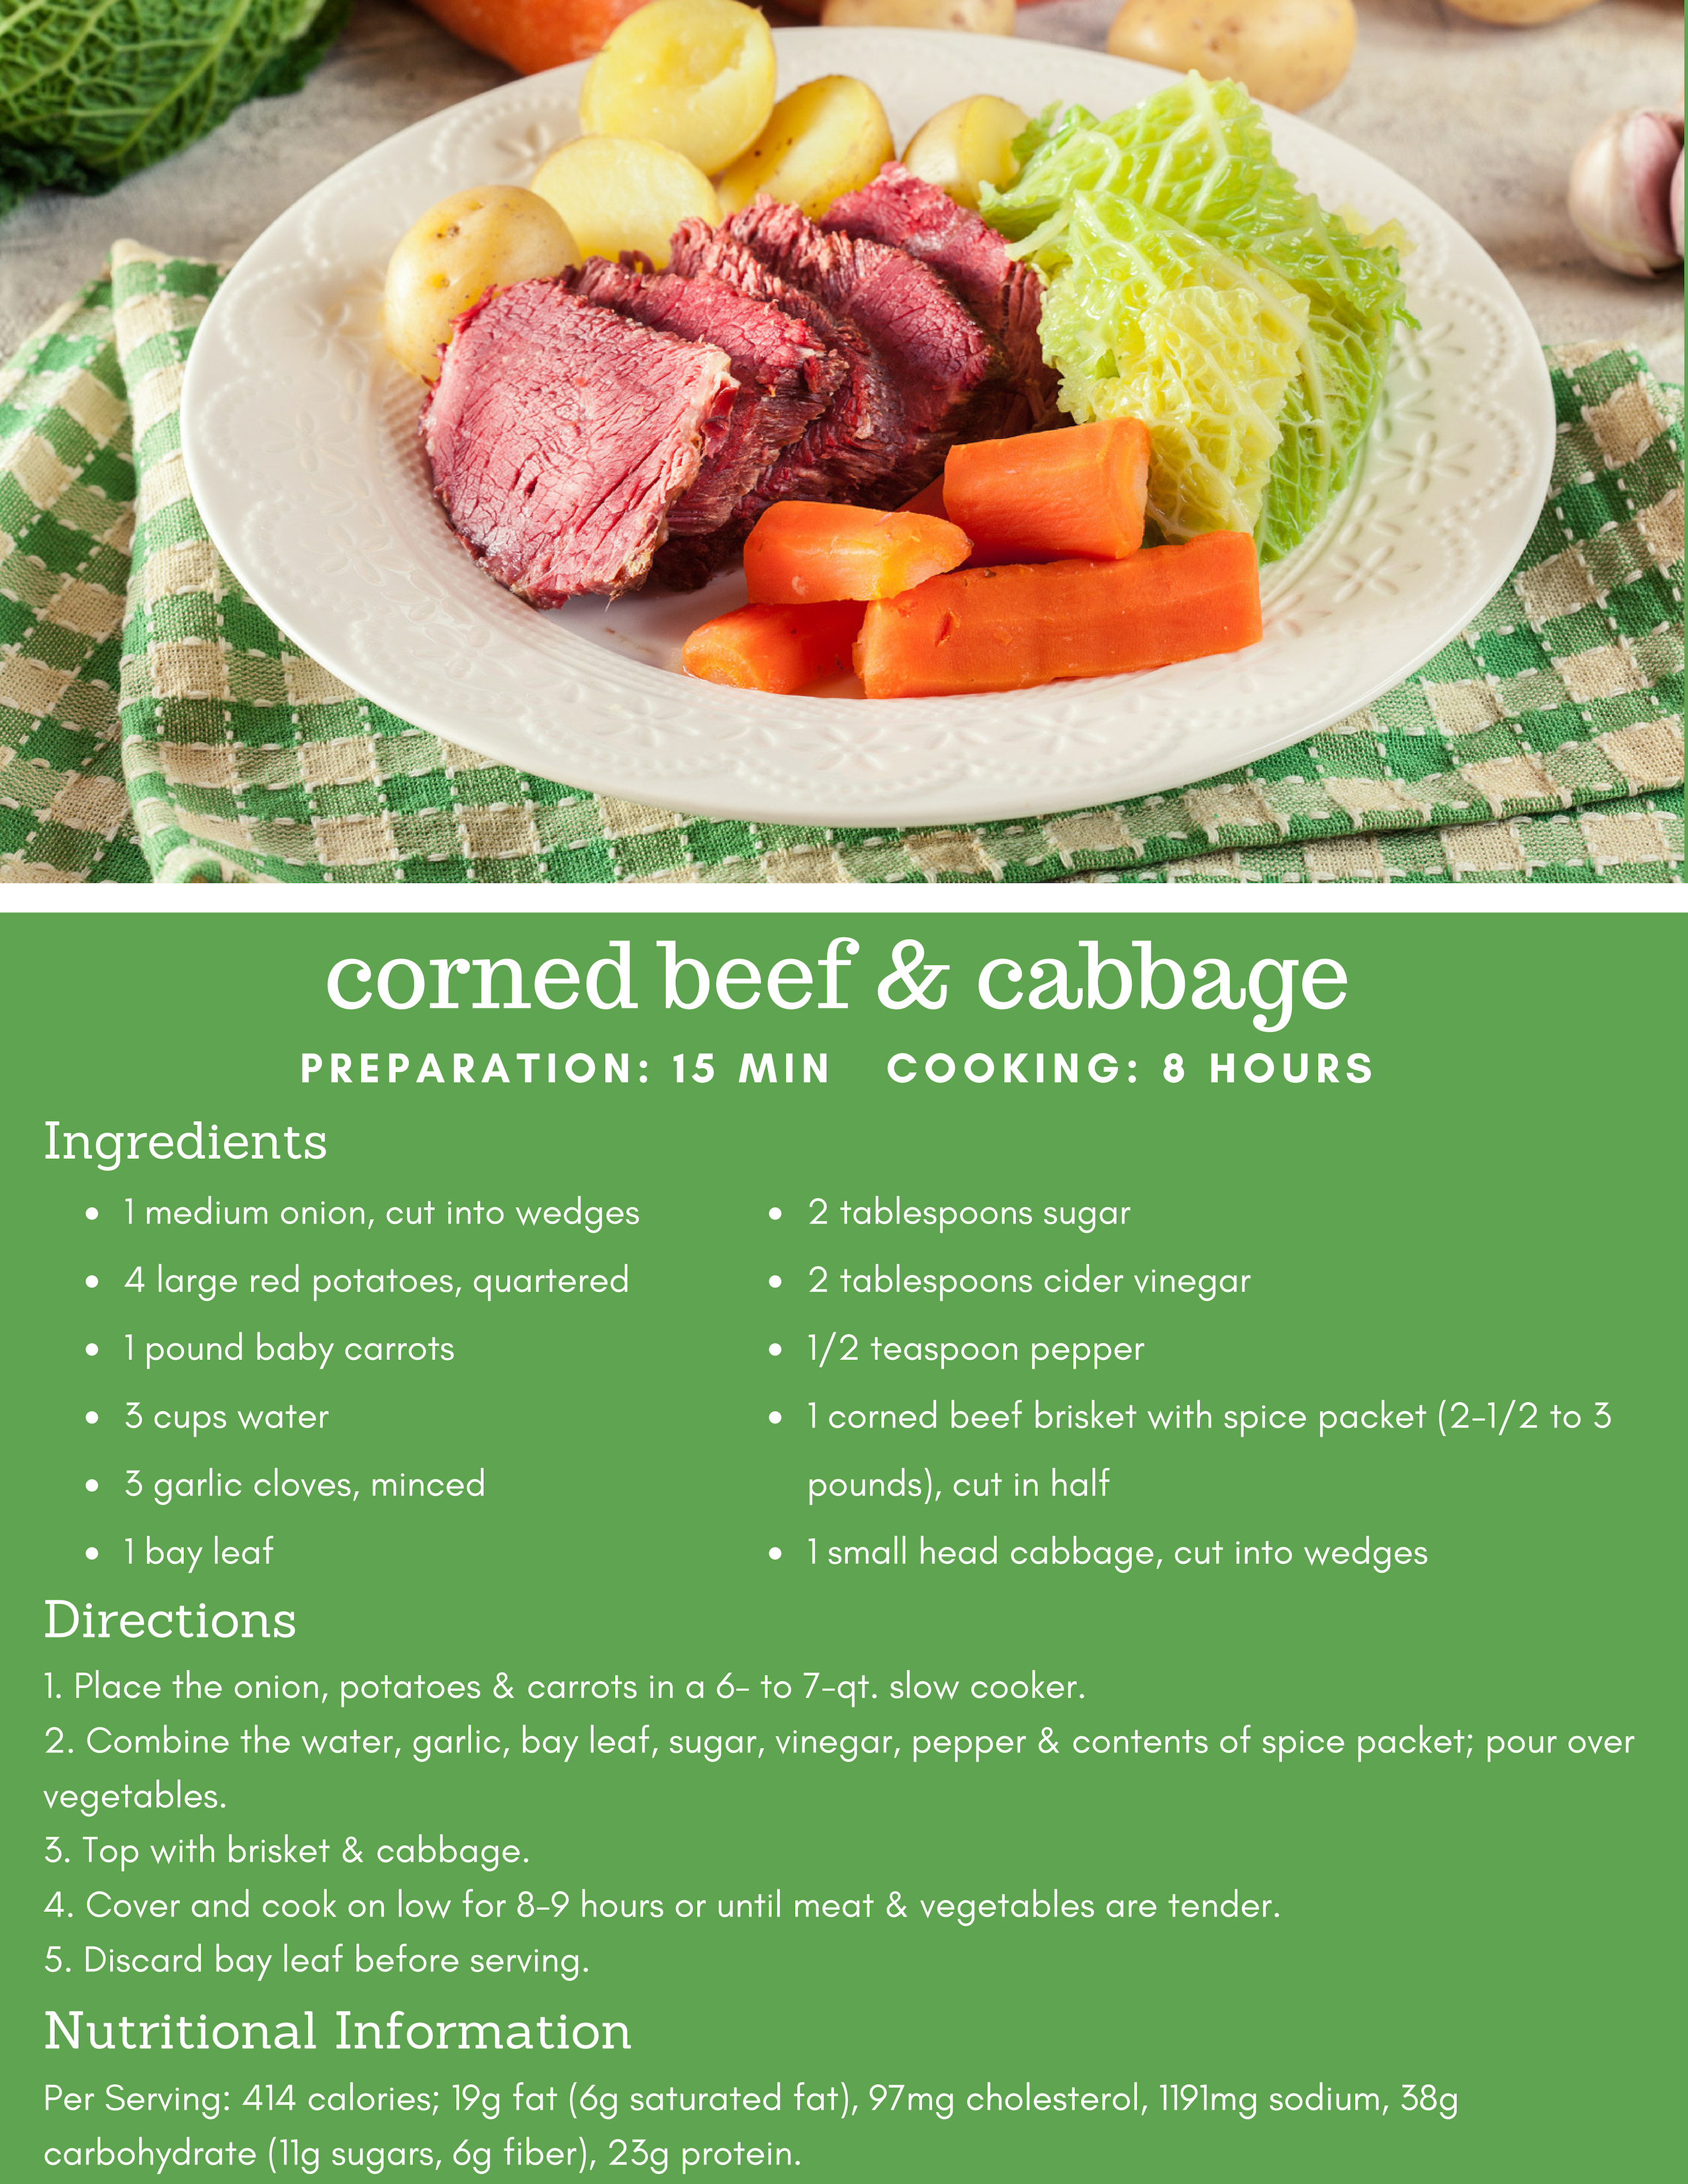 CORNED BEEF & CABBAGE